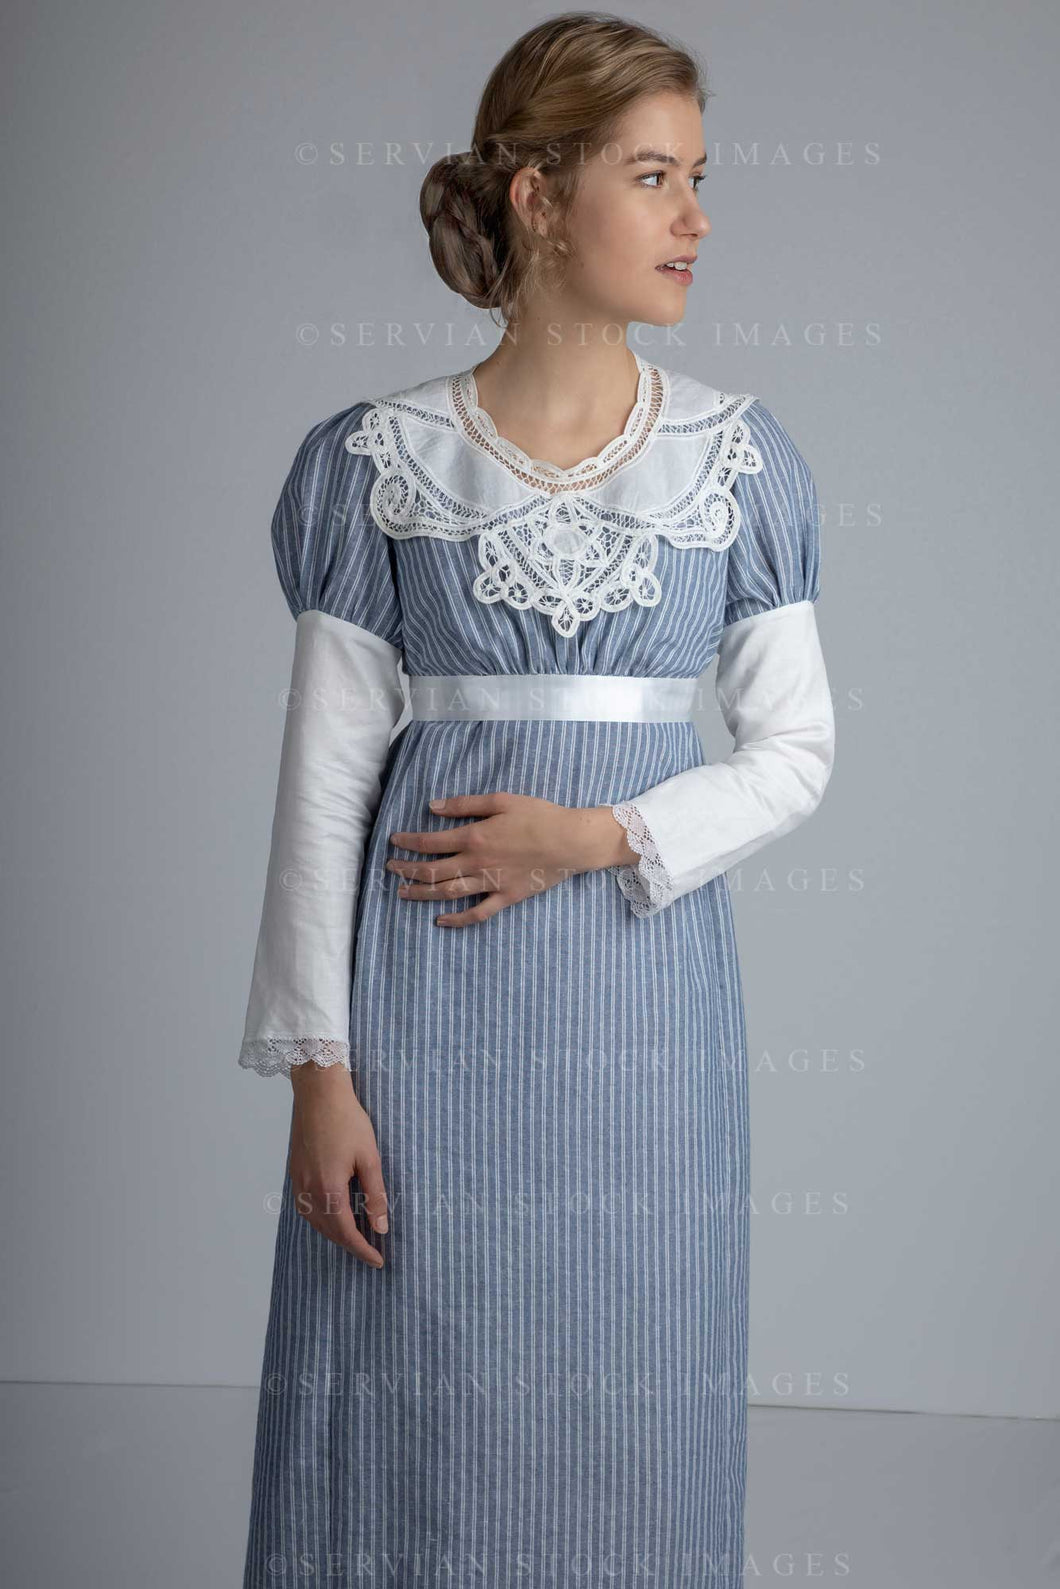 Regency woman in a striped cotton dress with a lace collar (Amalia 0609)